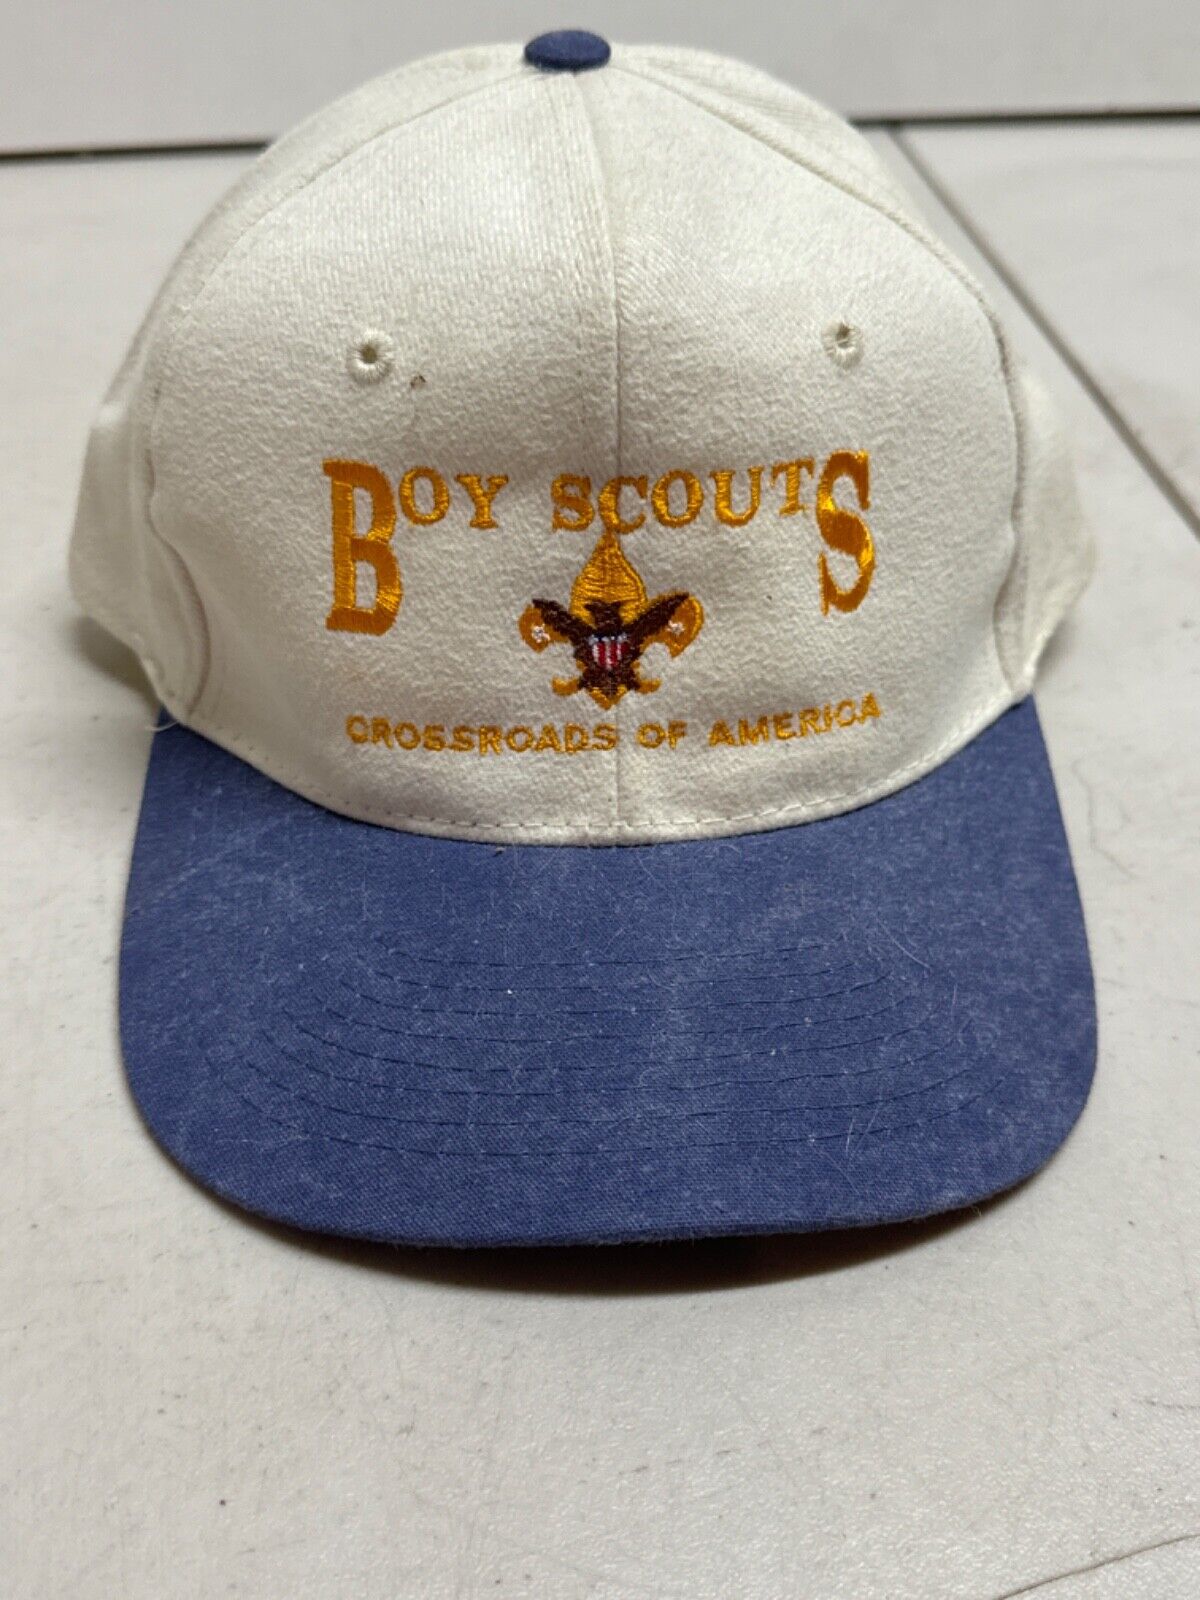 vtg Boy Scouts Crossroads of America Embroidered Adjustable hat